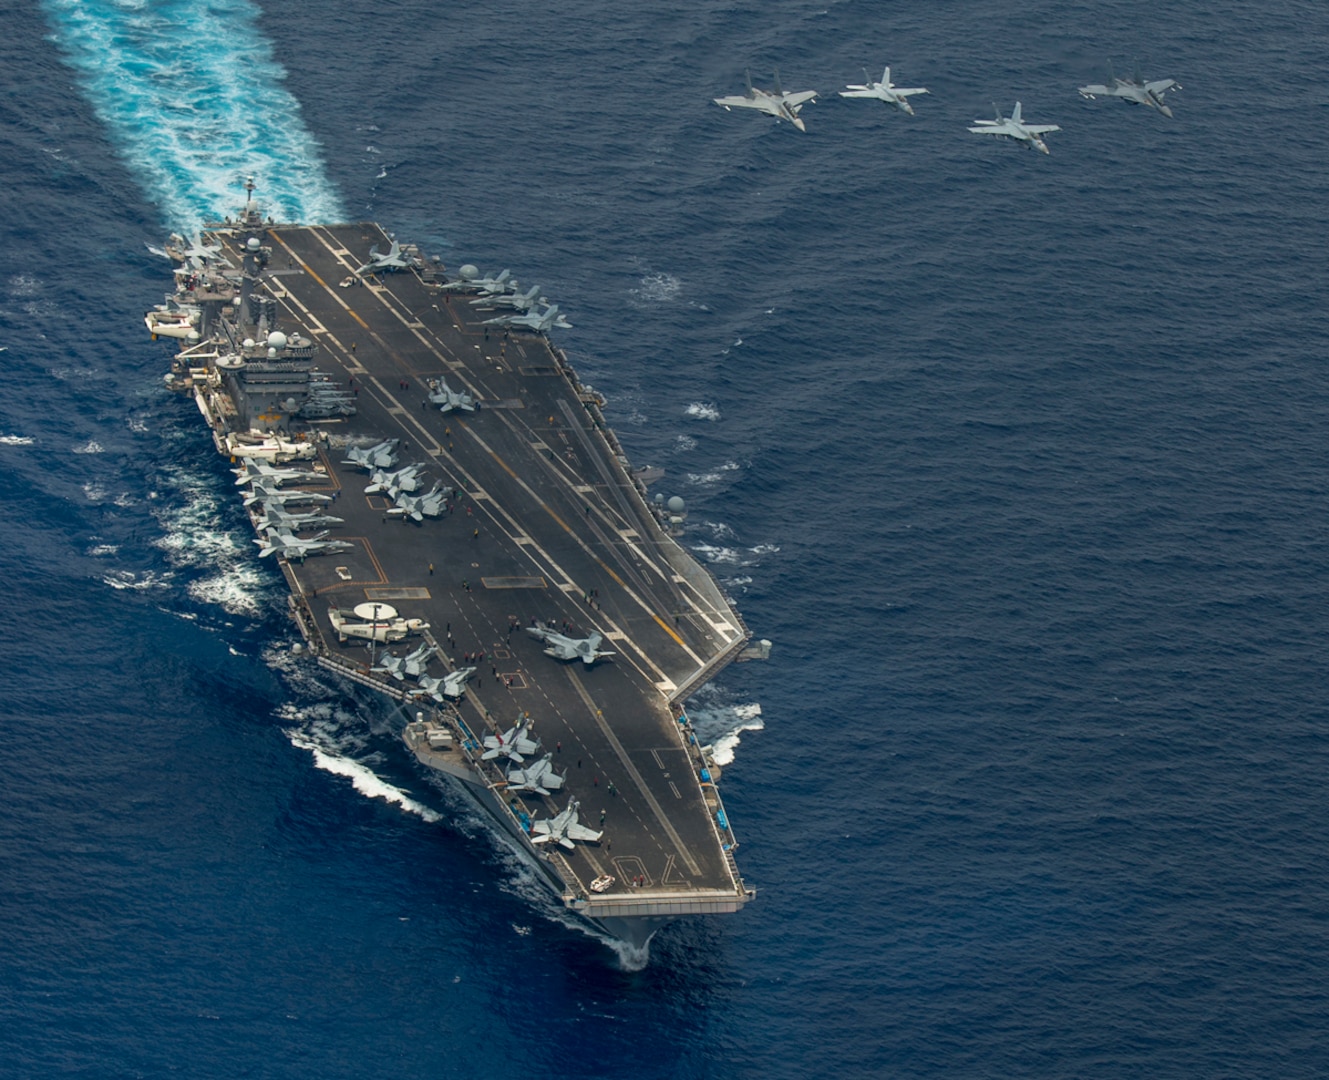 SOUTH CHINA SEA (May 10, 2015) - Two F/A-18 Super Hornets and two Royal Malaysian Air Force Mig 29 Fulcrums fly in formation above the aircraft carrier USS Carl Vinson (CVN 70). The Carl Vinson Strike group is deployed to 7th Fleet area of operations supporting security and stability in the Indo-Asia-Pacific region. 